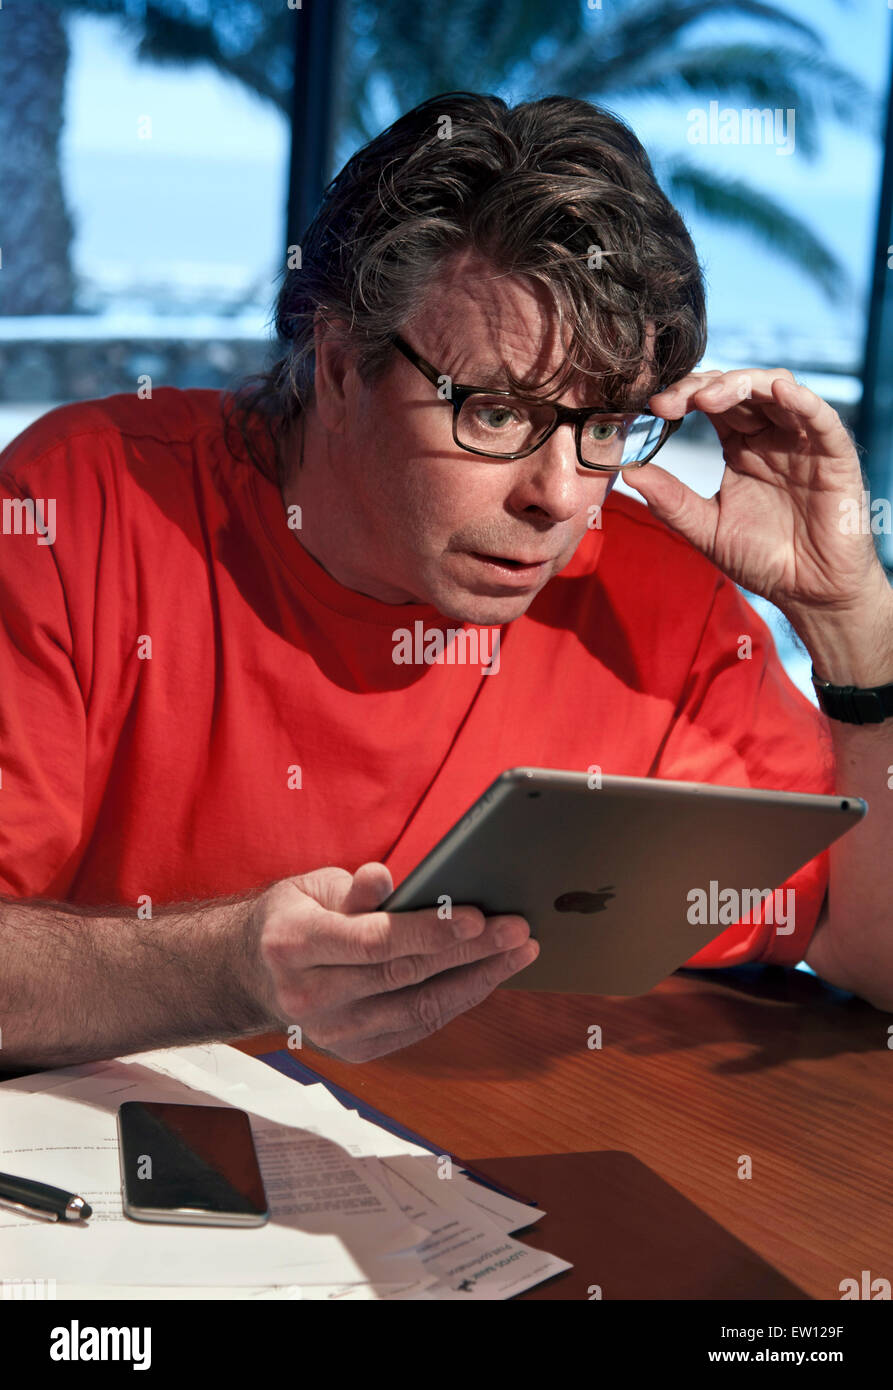 Man in holiday setting surprised by detail screen information on his iPad Air tablet computer with iPhone 6 smartphone nearby Stock Photo